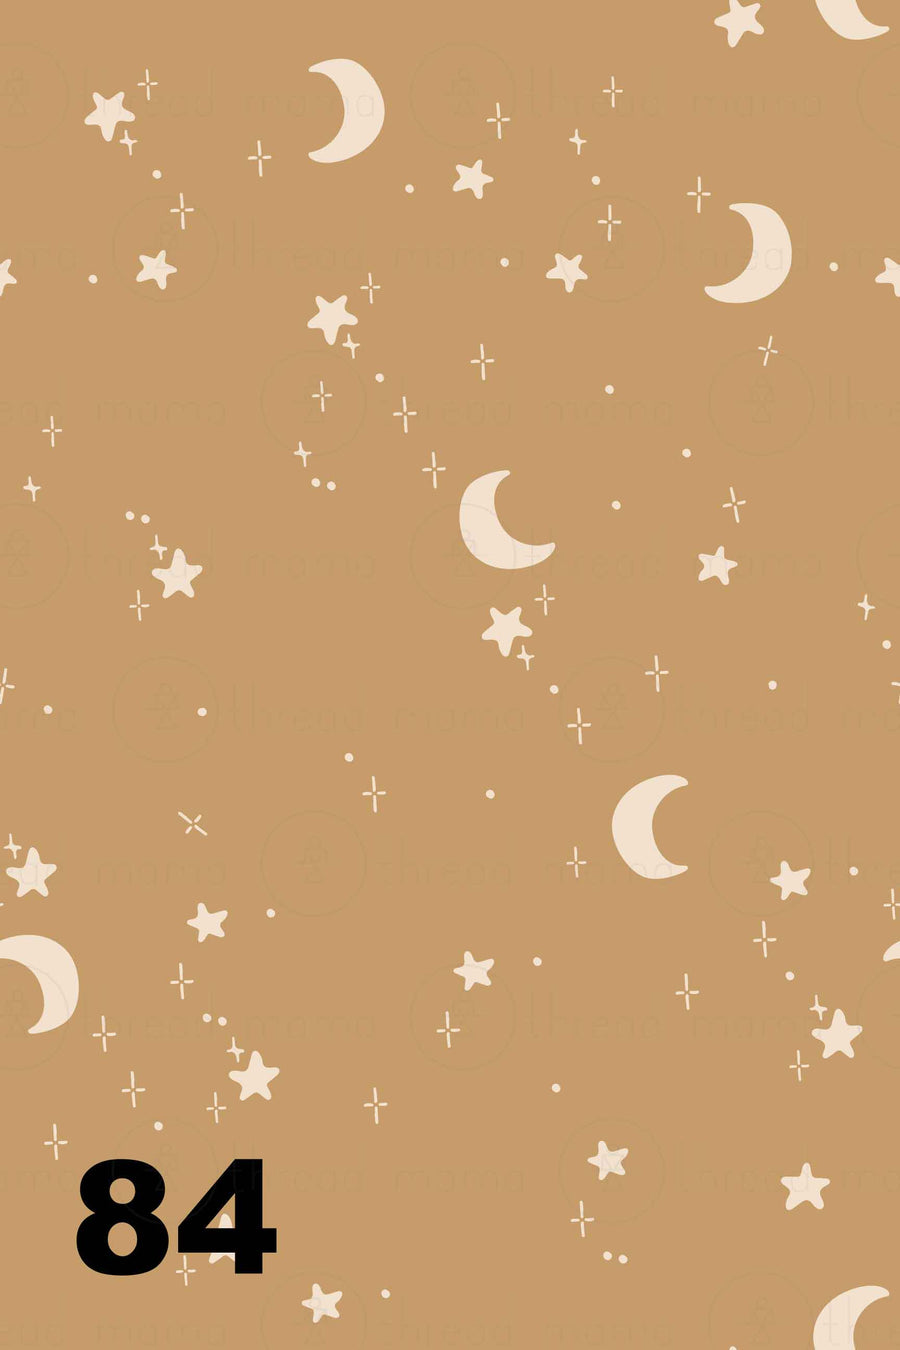 Background Pattern #84 (Printable Poster)